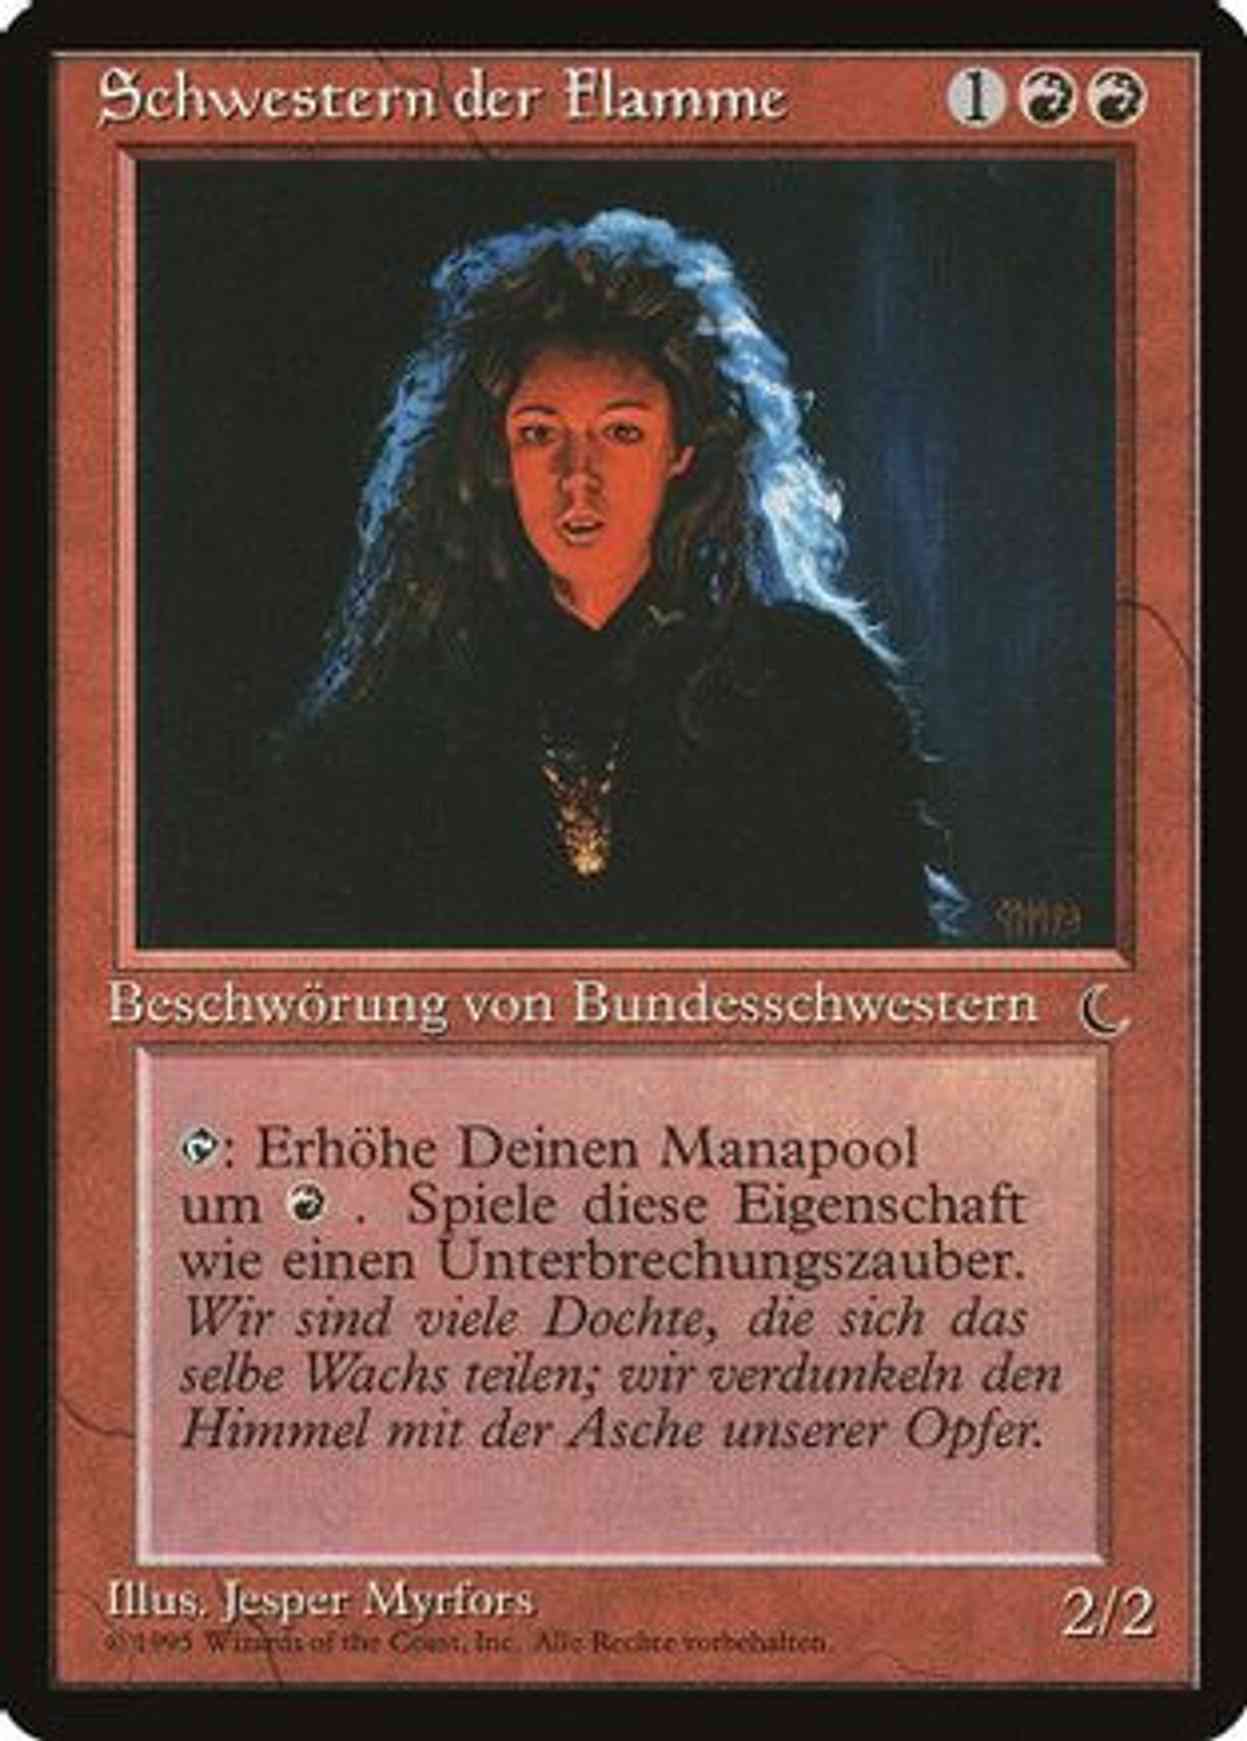 Sisters of the Flame (German) - "Schwestern der Flamme" magic card front